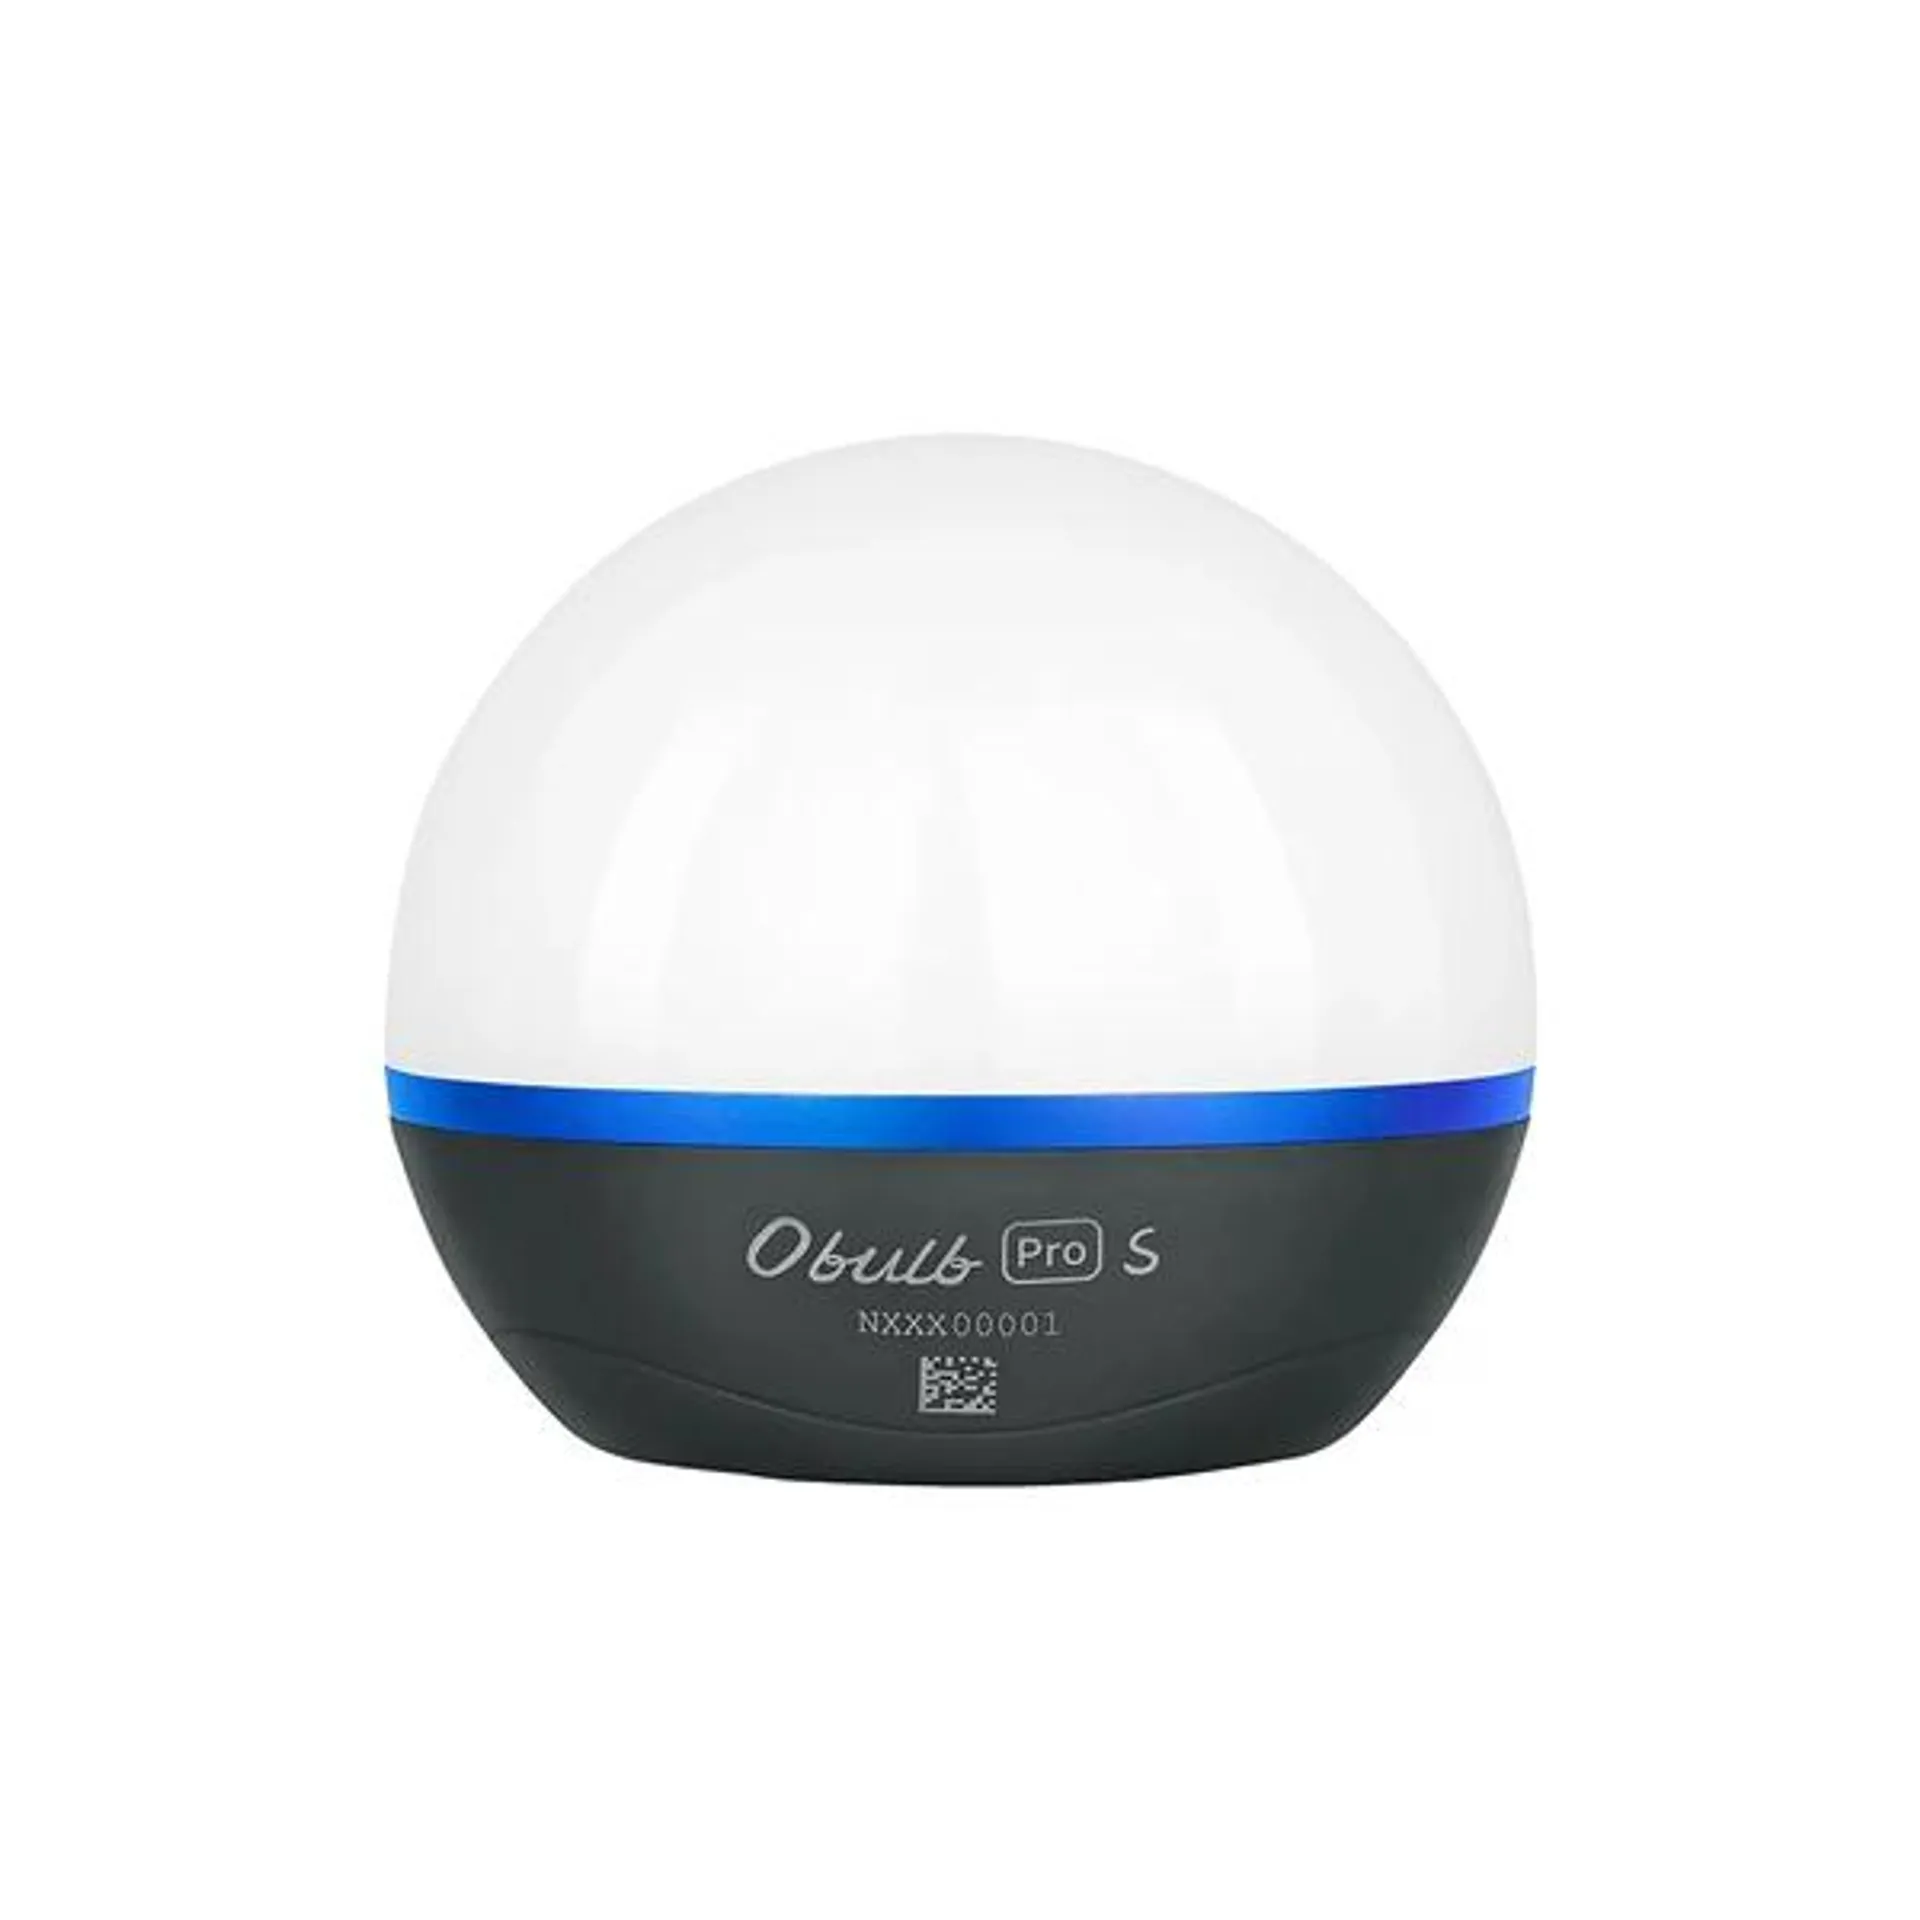 Olight Obulb Pro S Magnetic Light Ball with App Control